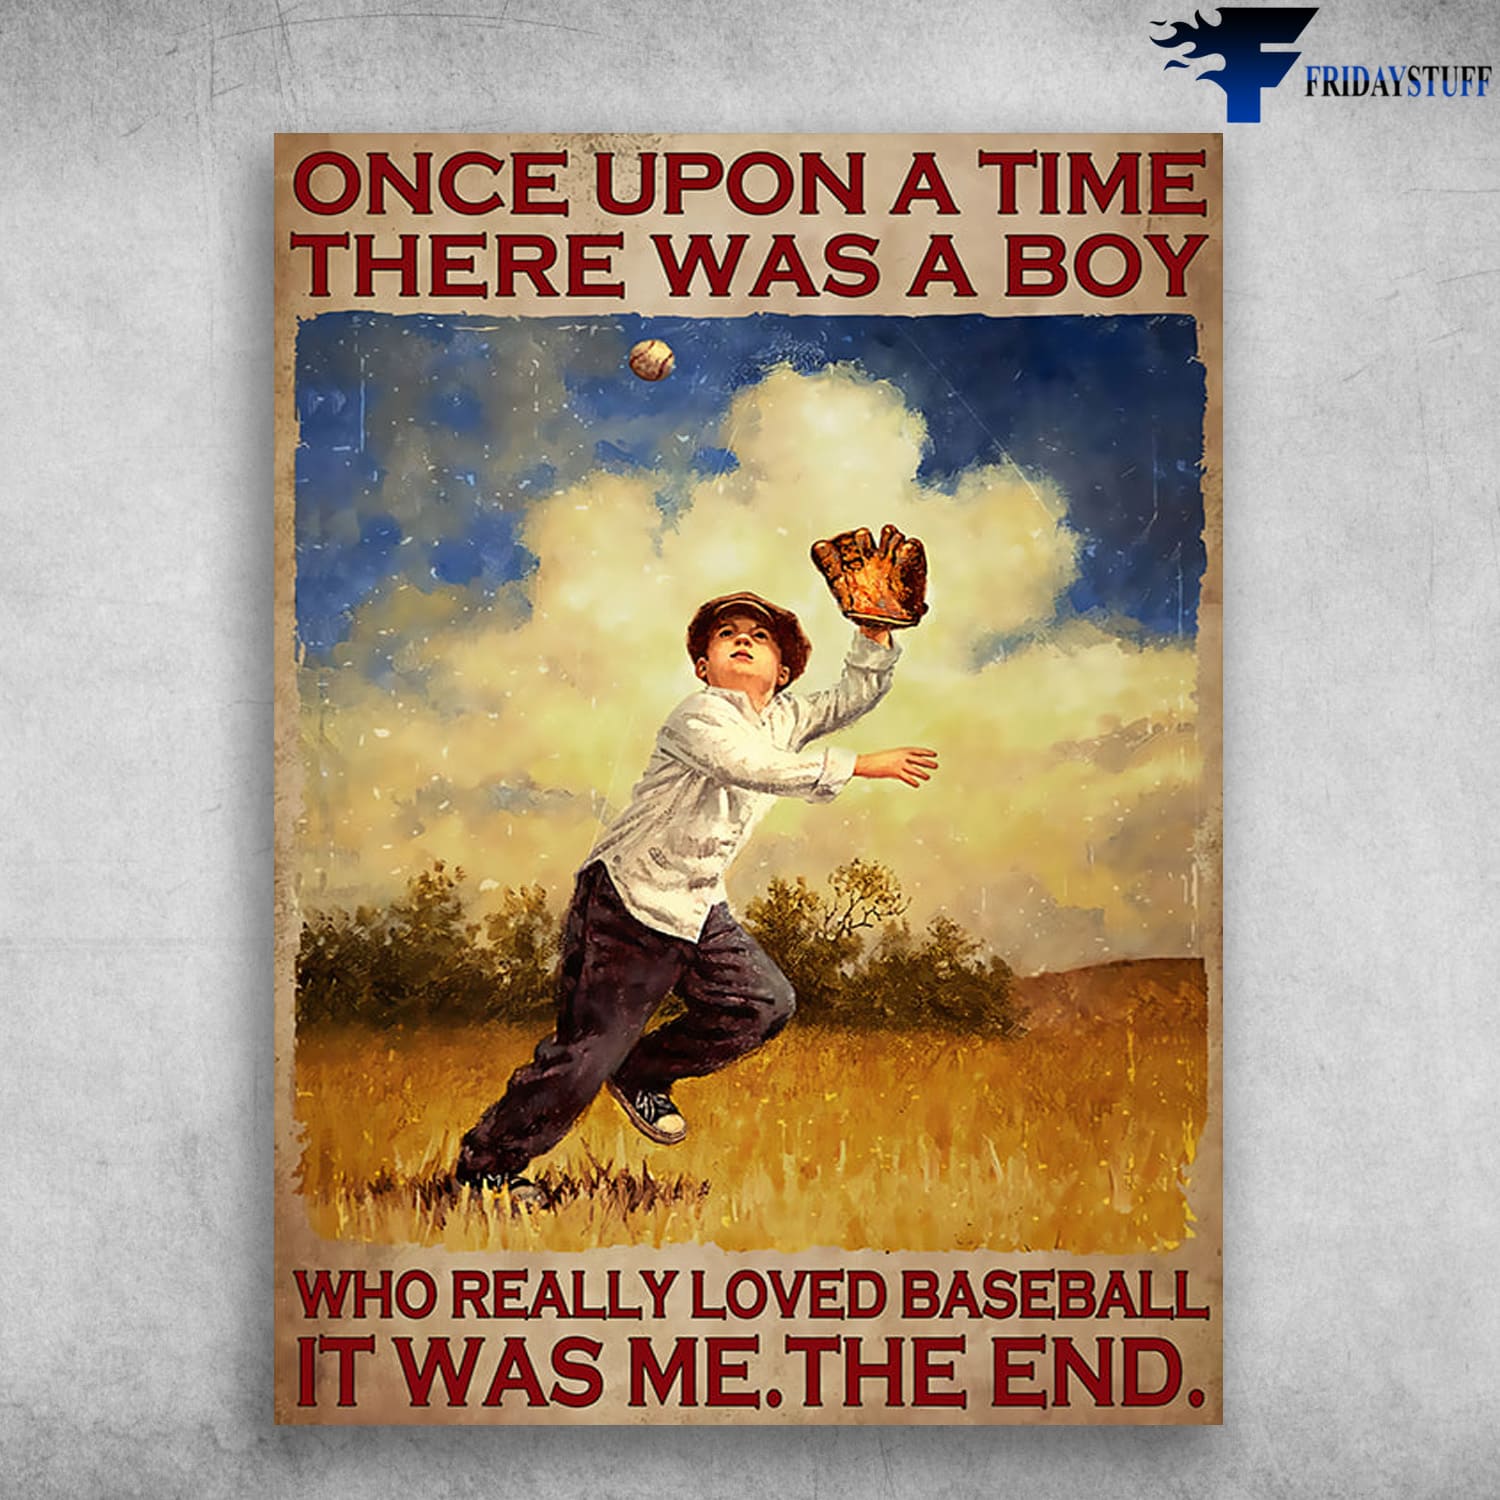 Baseball Poster, Baseball Boy, Baseball Lover, Once Upon A Time, There Was A Boy, Who Really Loved Baseball, It Was Me, The End